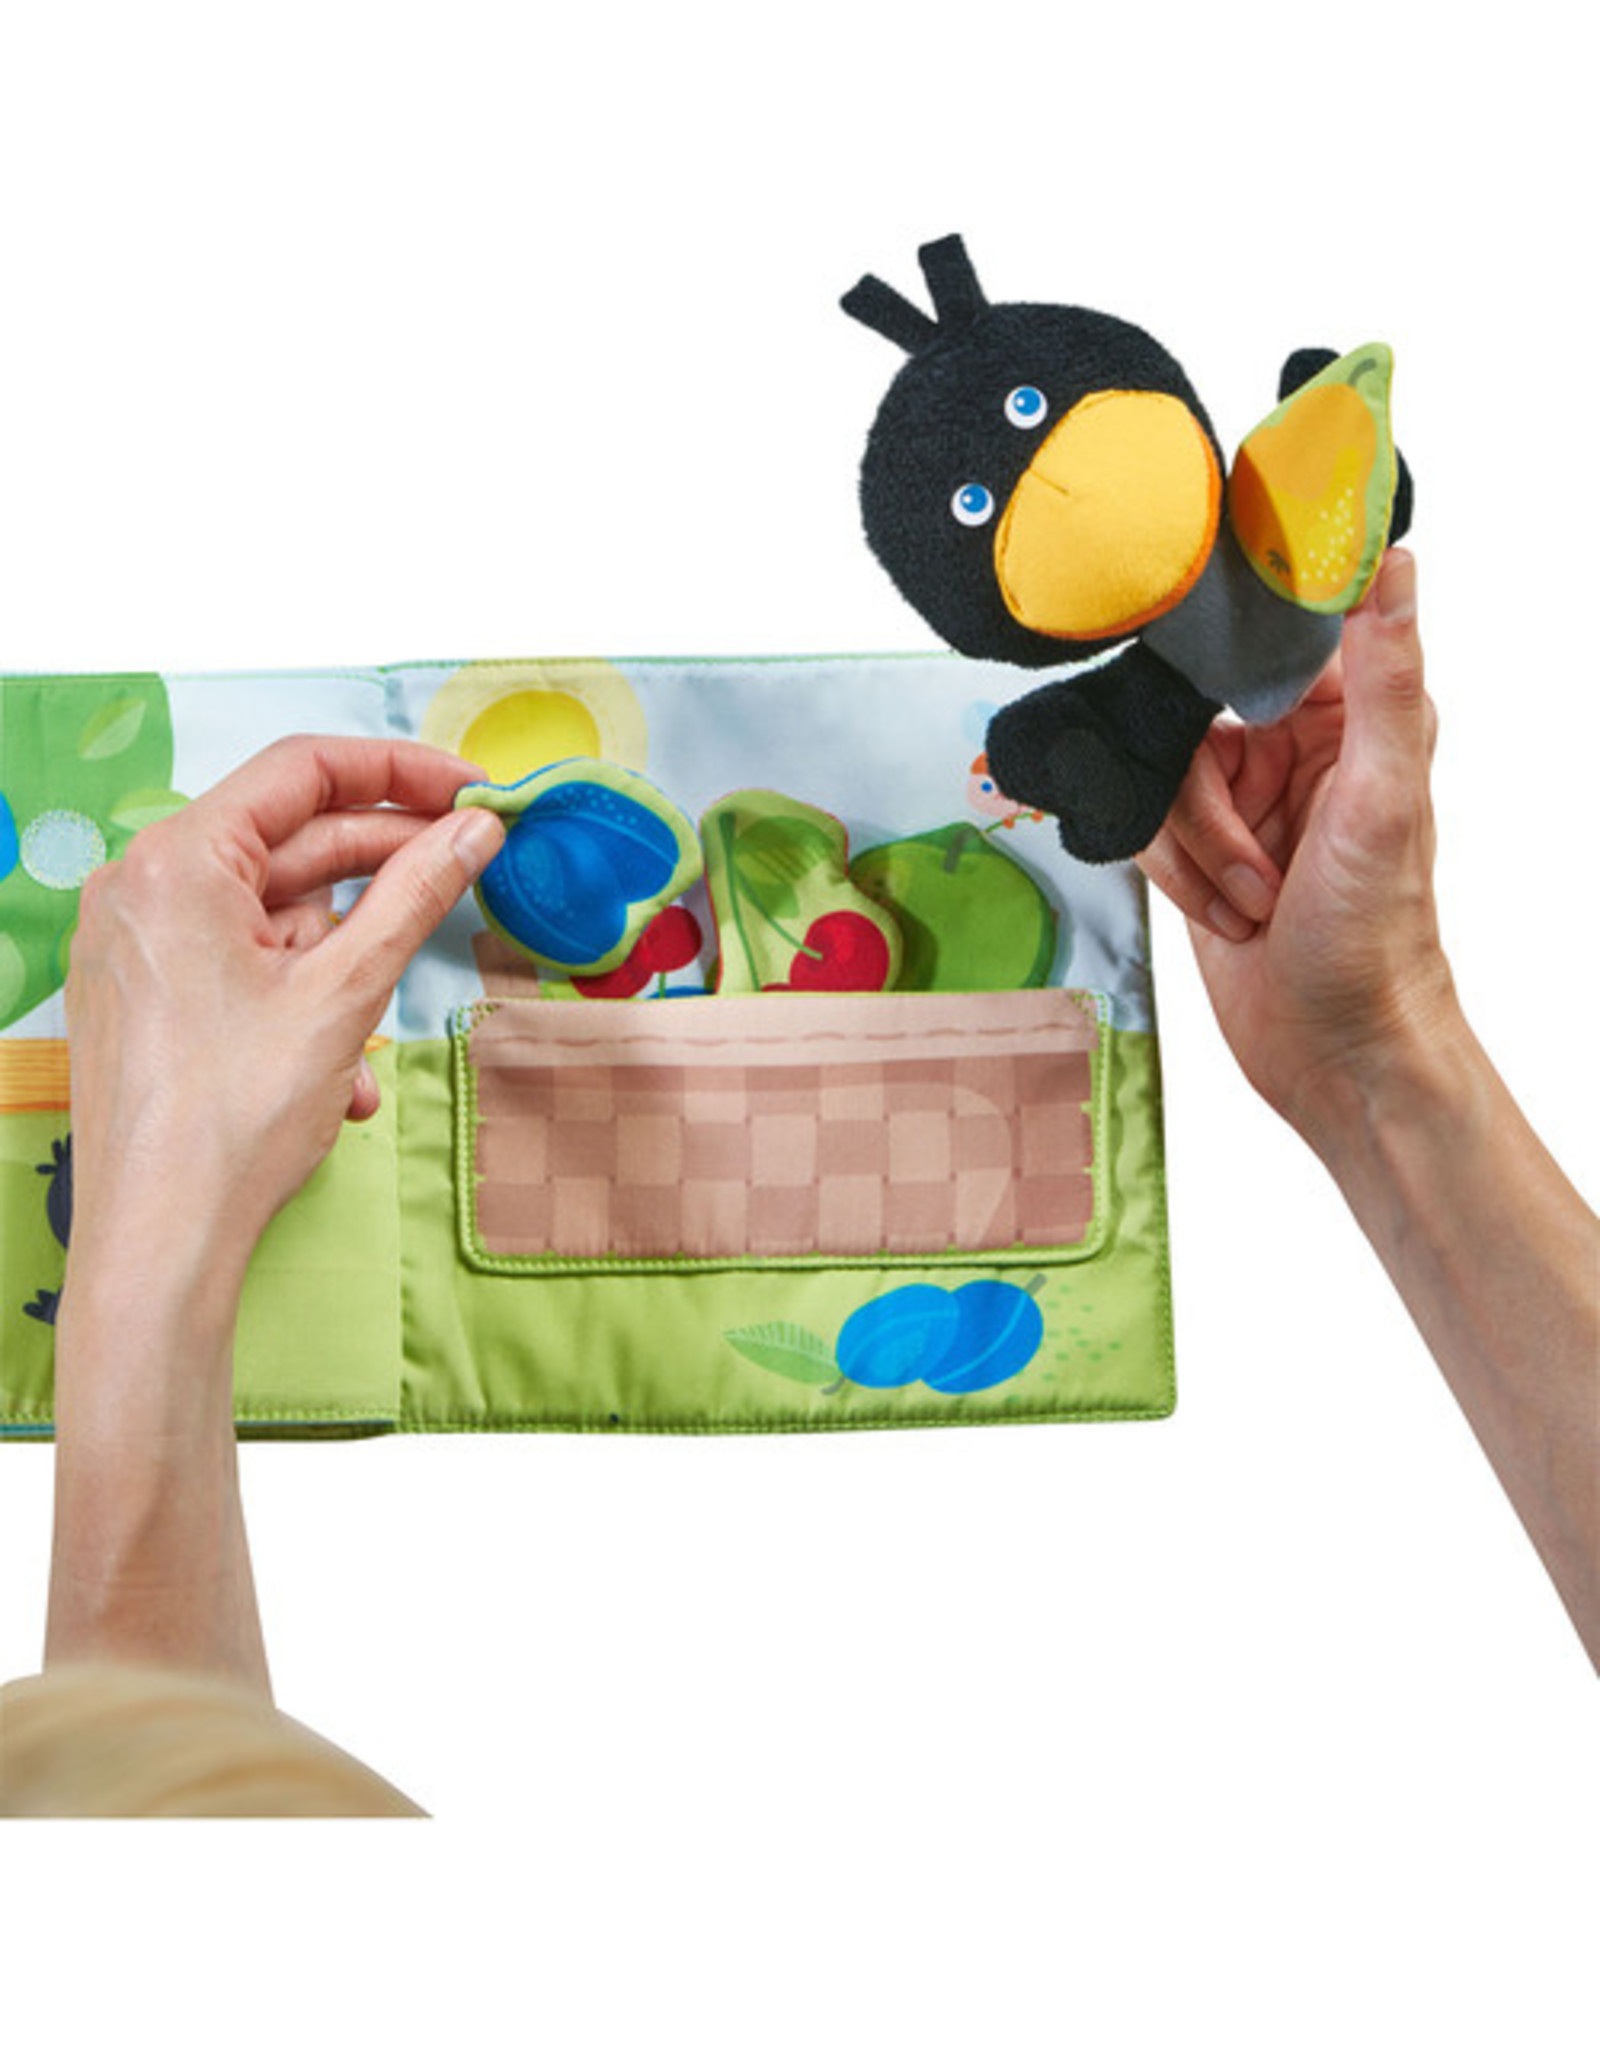 HABA Orchard Fabric Baby Book with Raven Finger Puppet